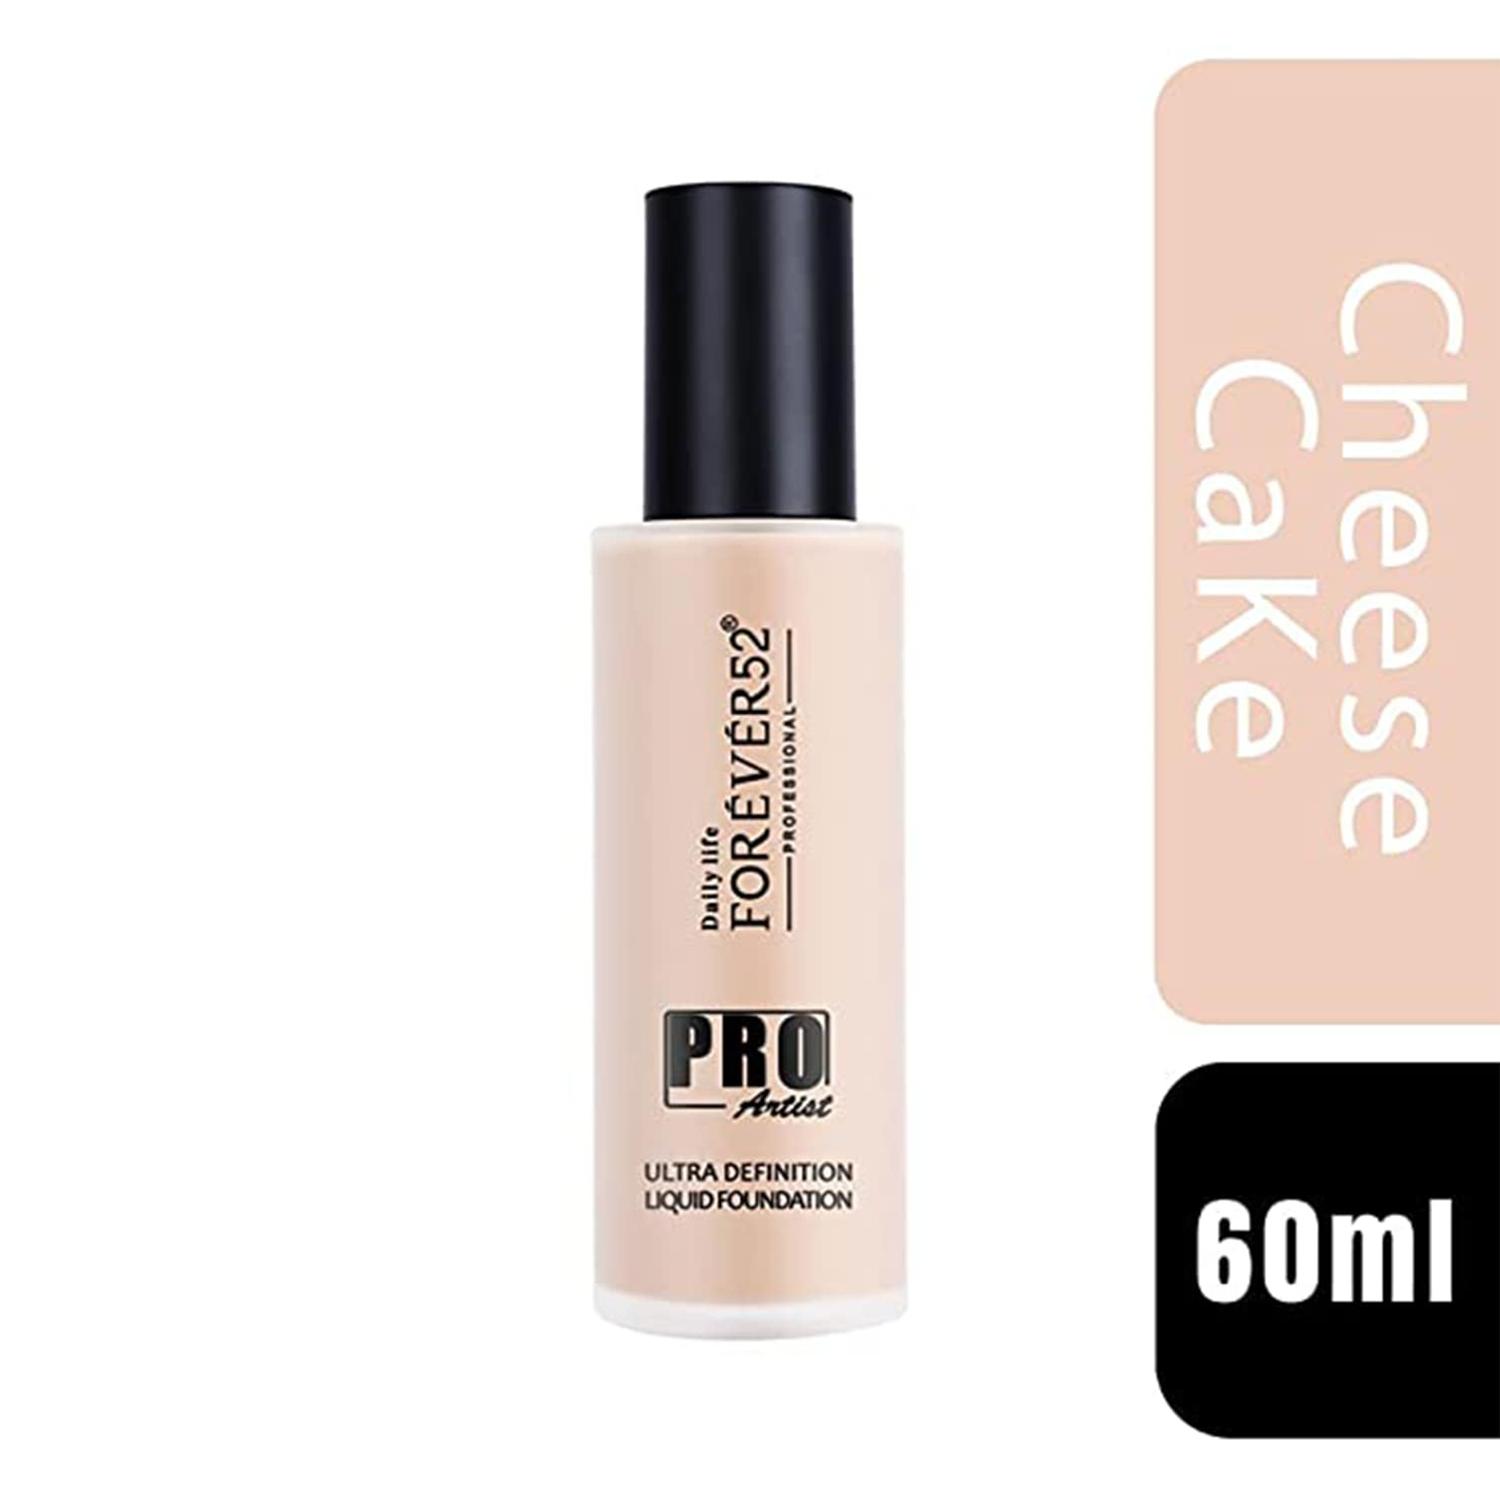 Daily Life Forever52 | Daily Life Forever52 Pro Artist Ultra Definition Liquid Foundation BUF001 - Cheese Cake (60ml)